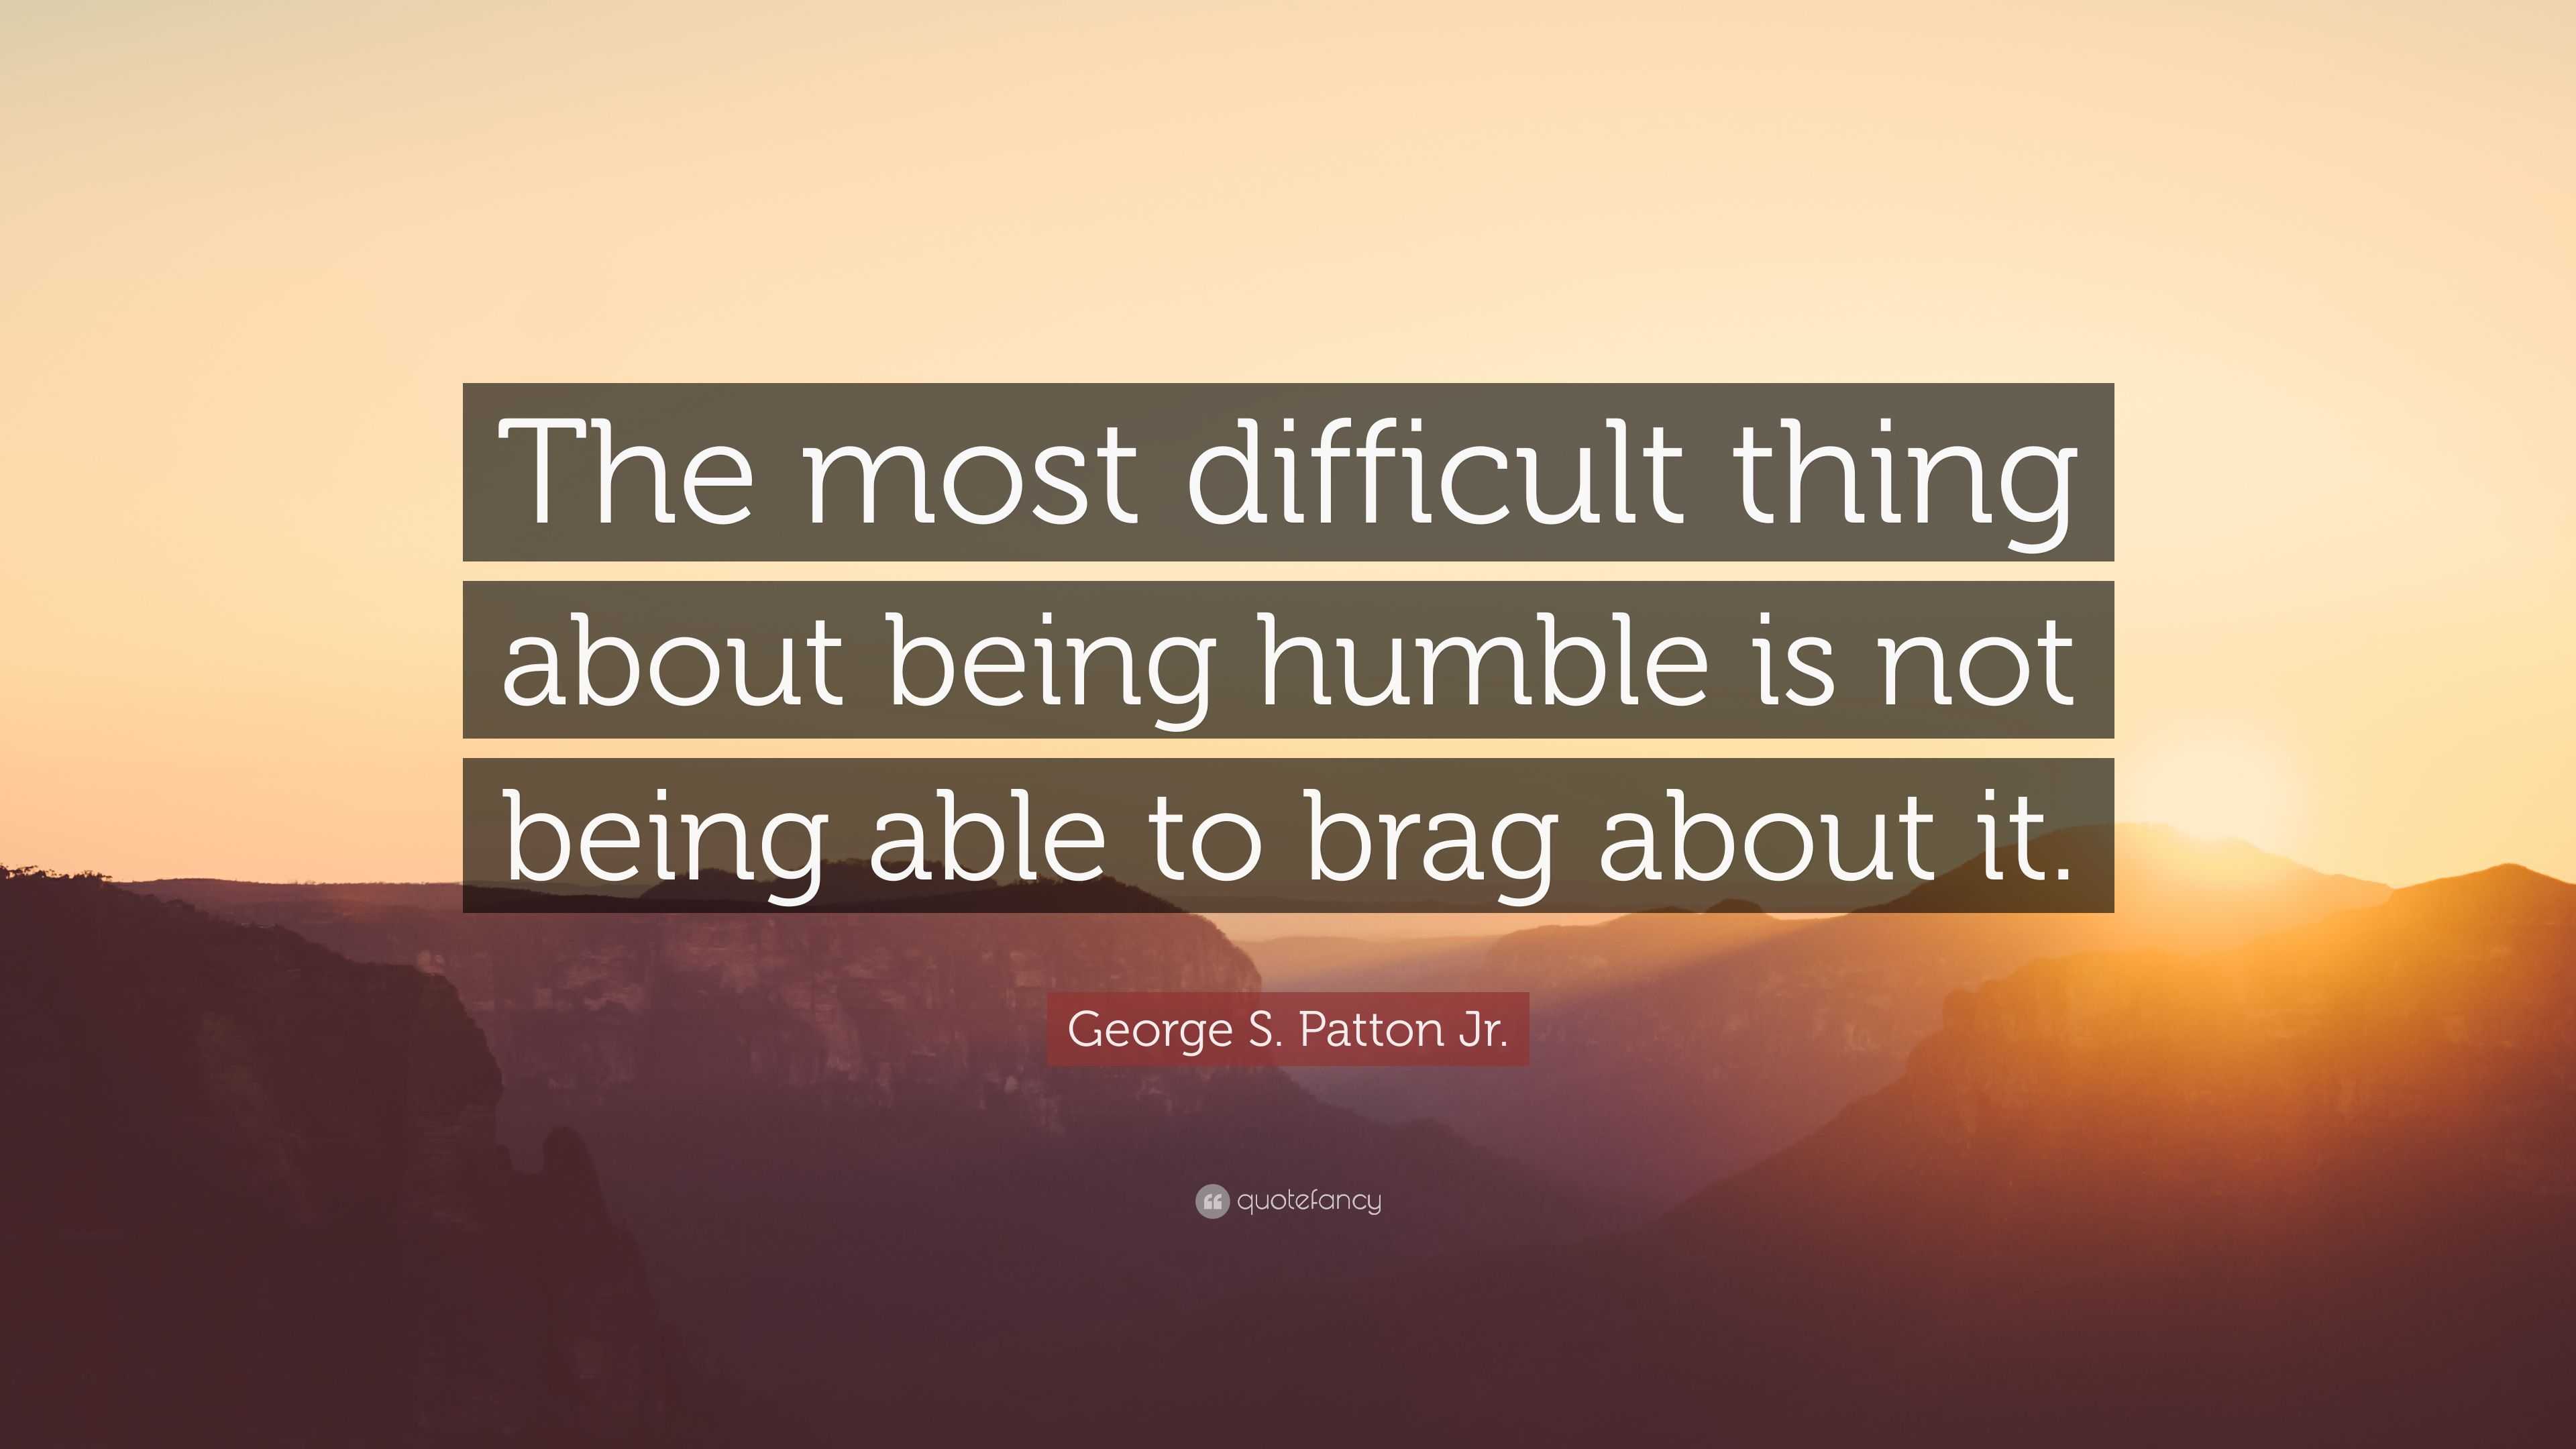 George S. Patton Jr. Quote: “The most difficult thing about being